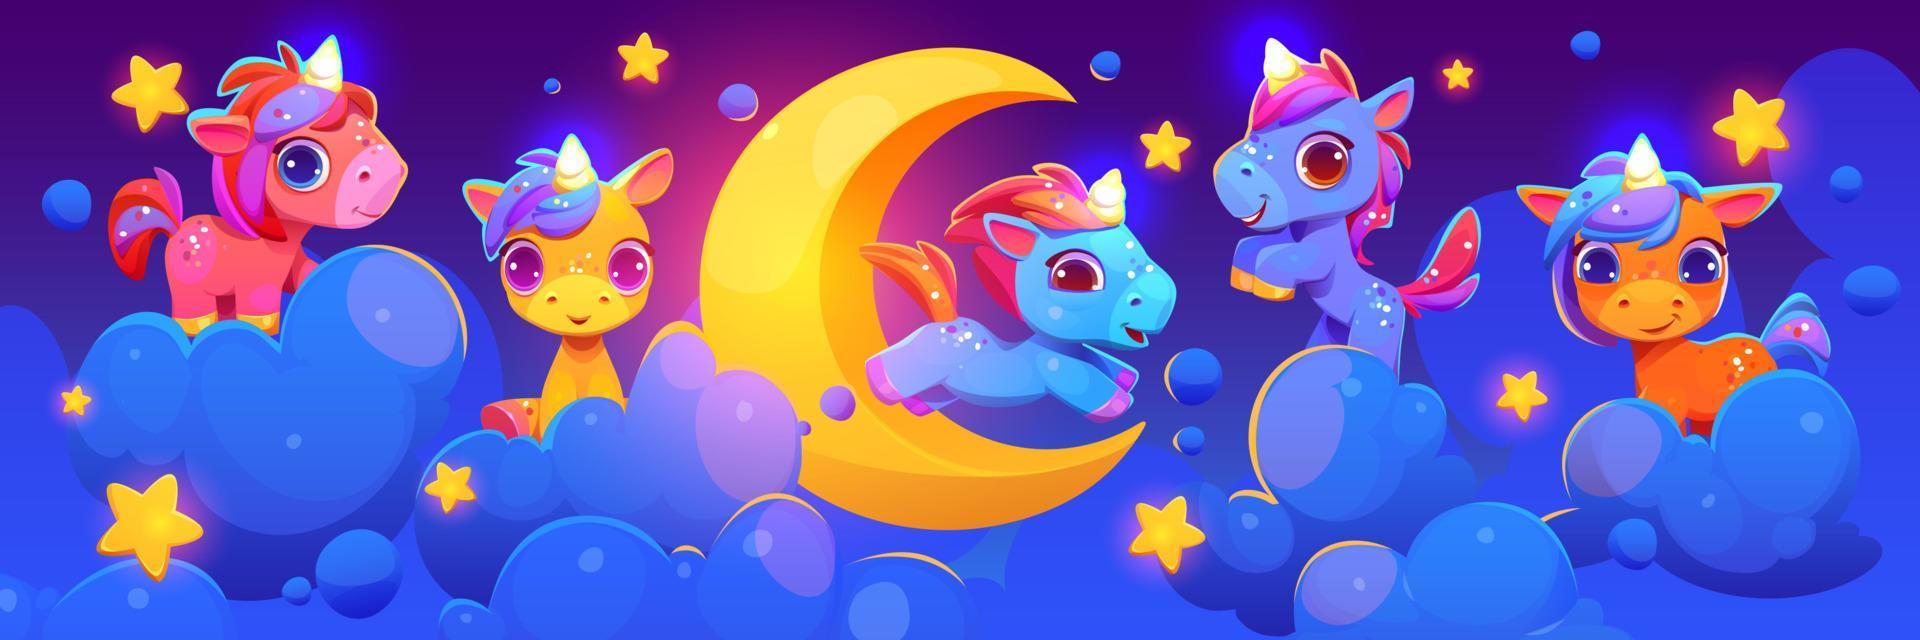 Cartoon unicorn on clouds background with moon vector